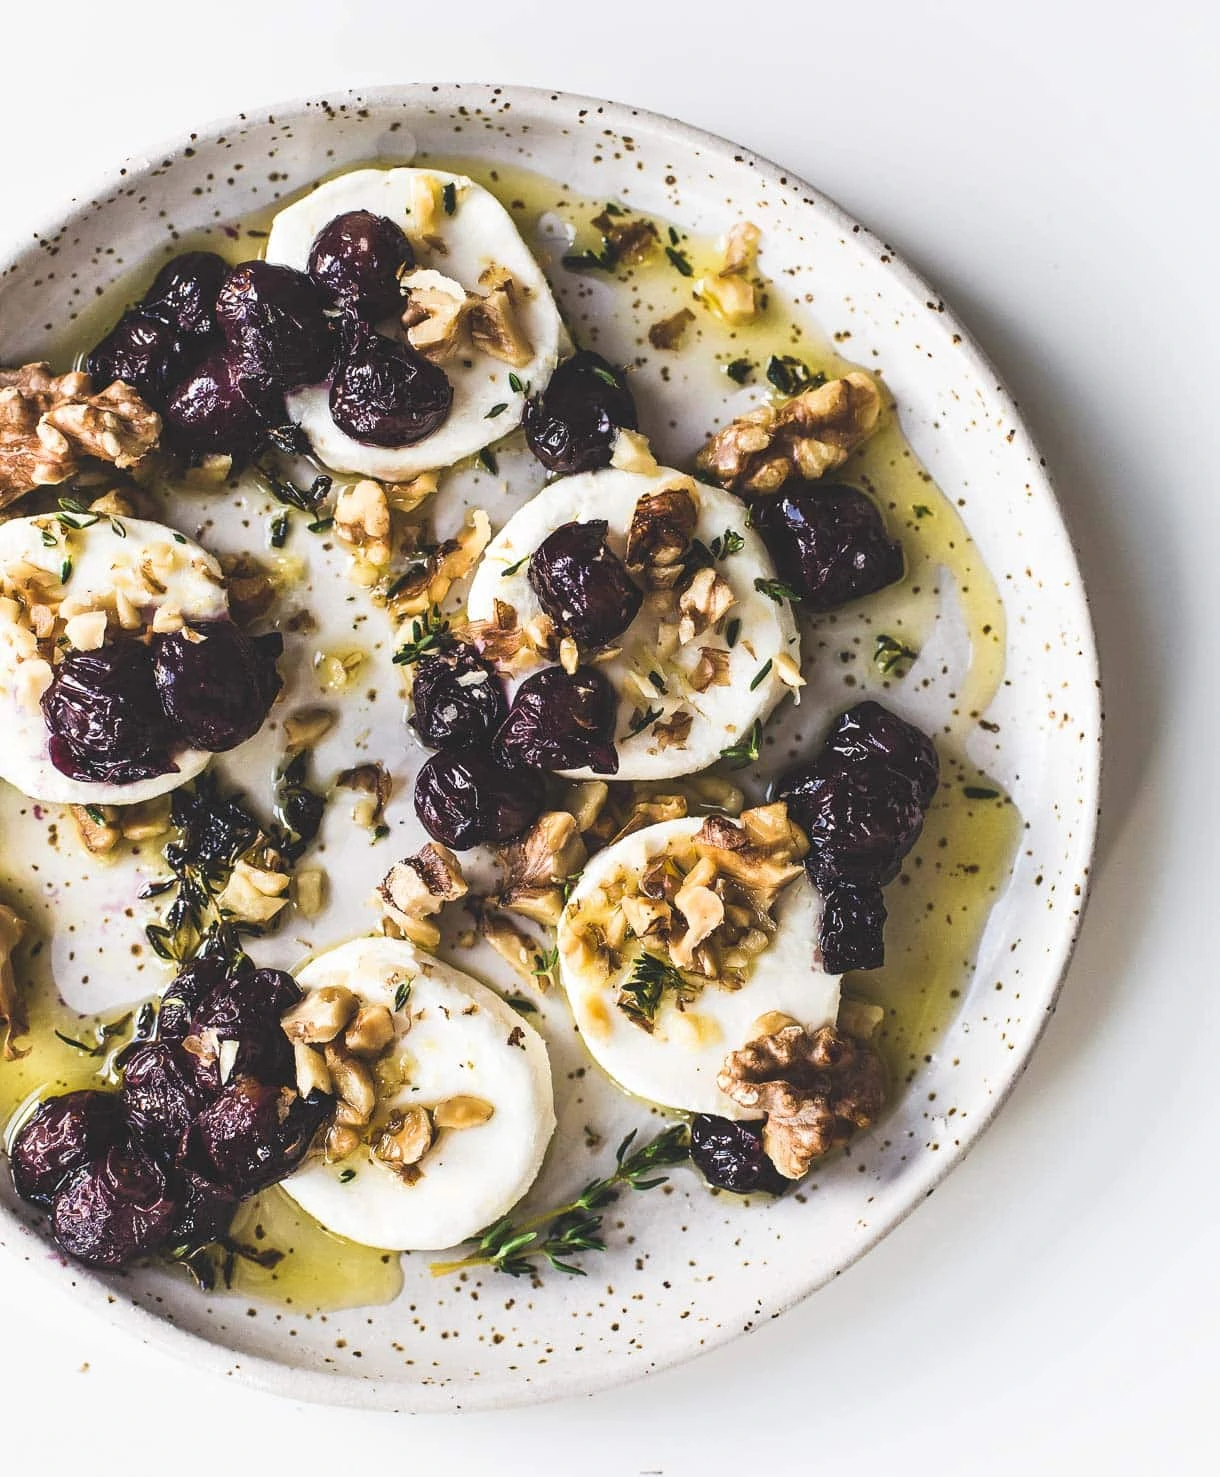 Marinated Goat Cheese with Roasted Grapes and Walnuts